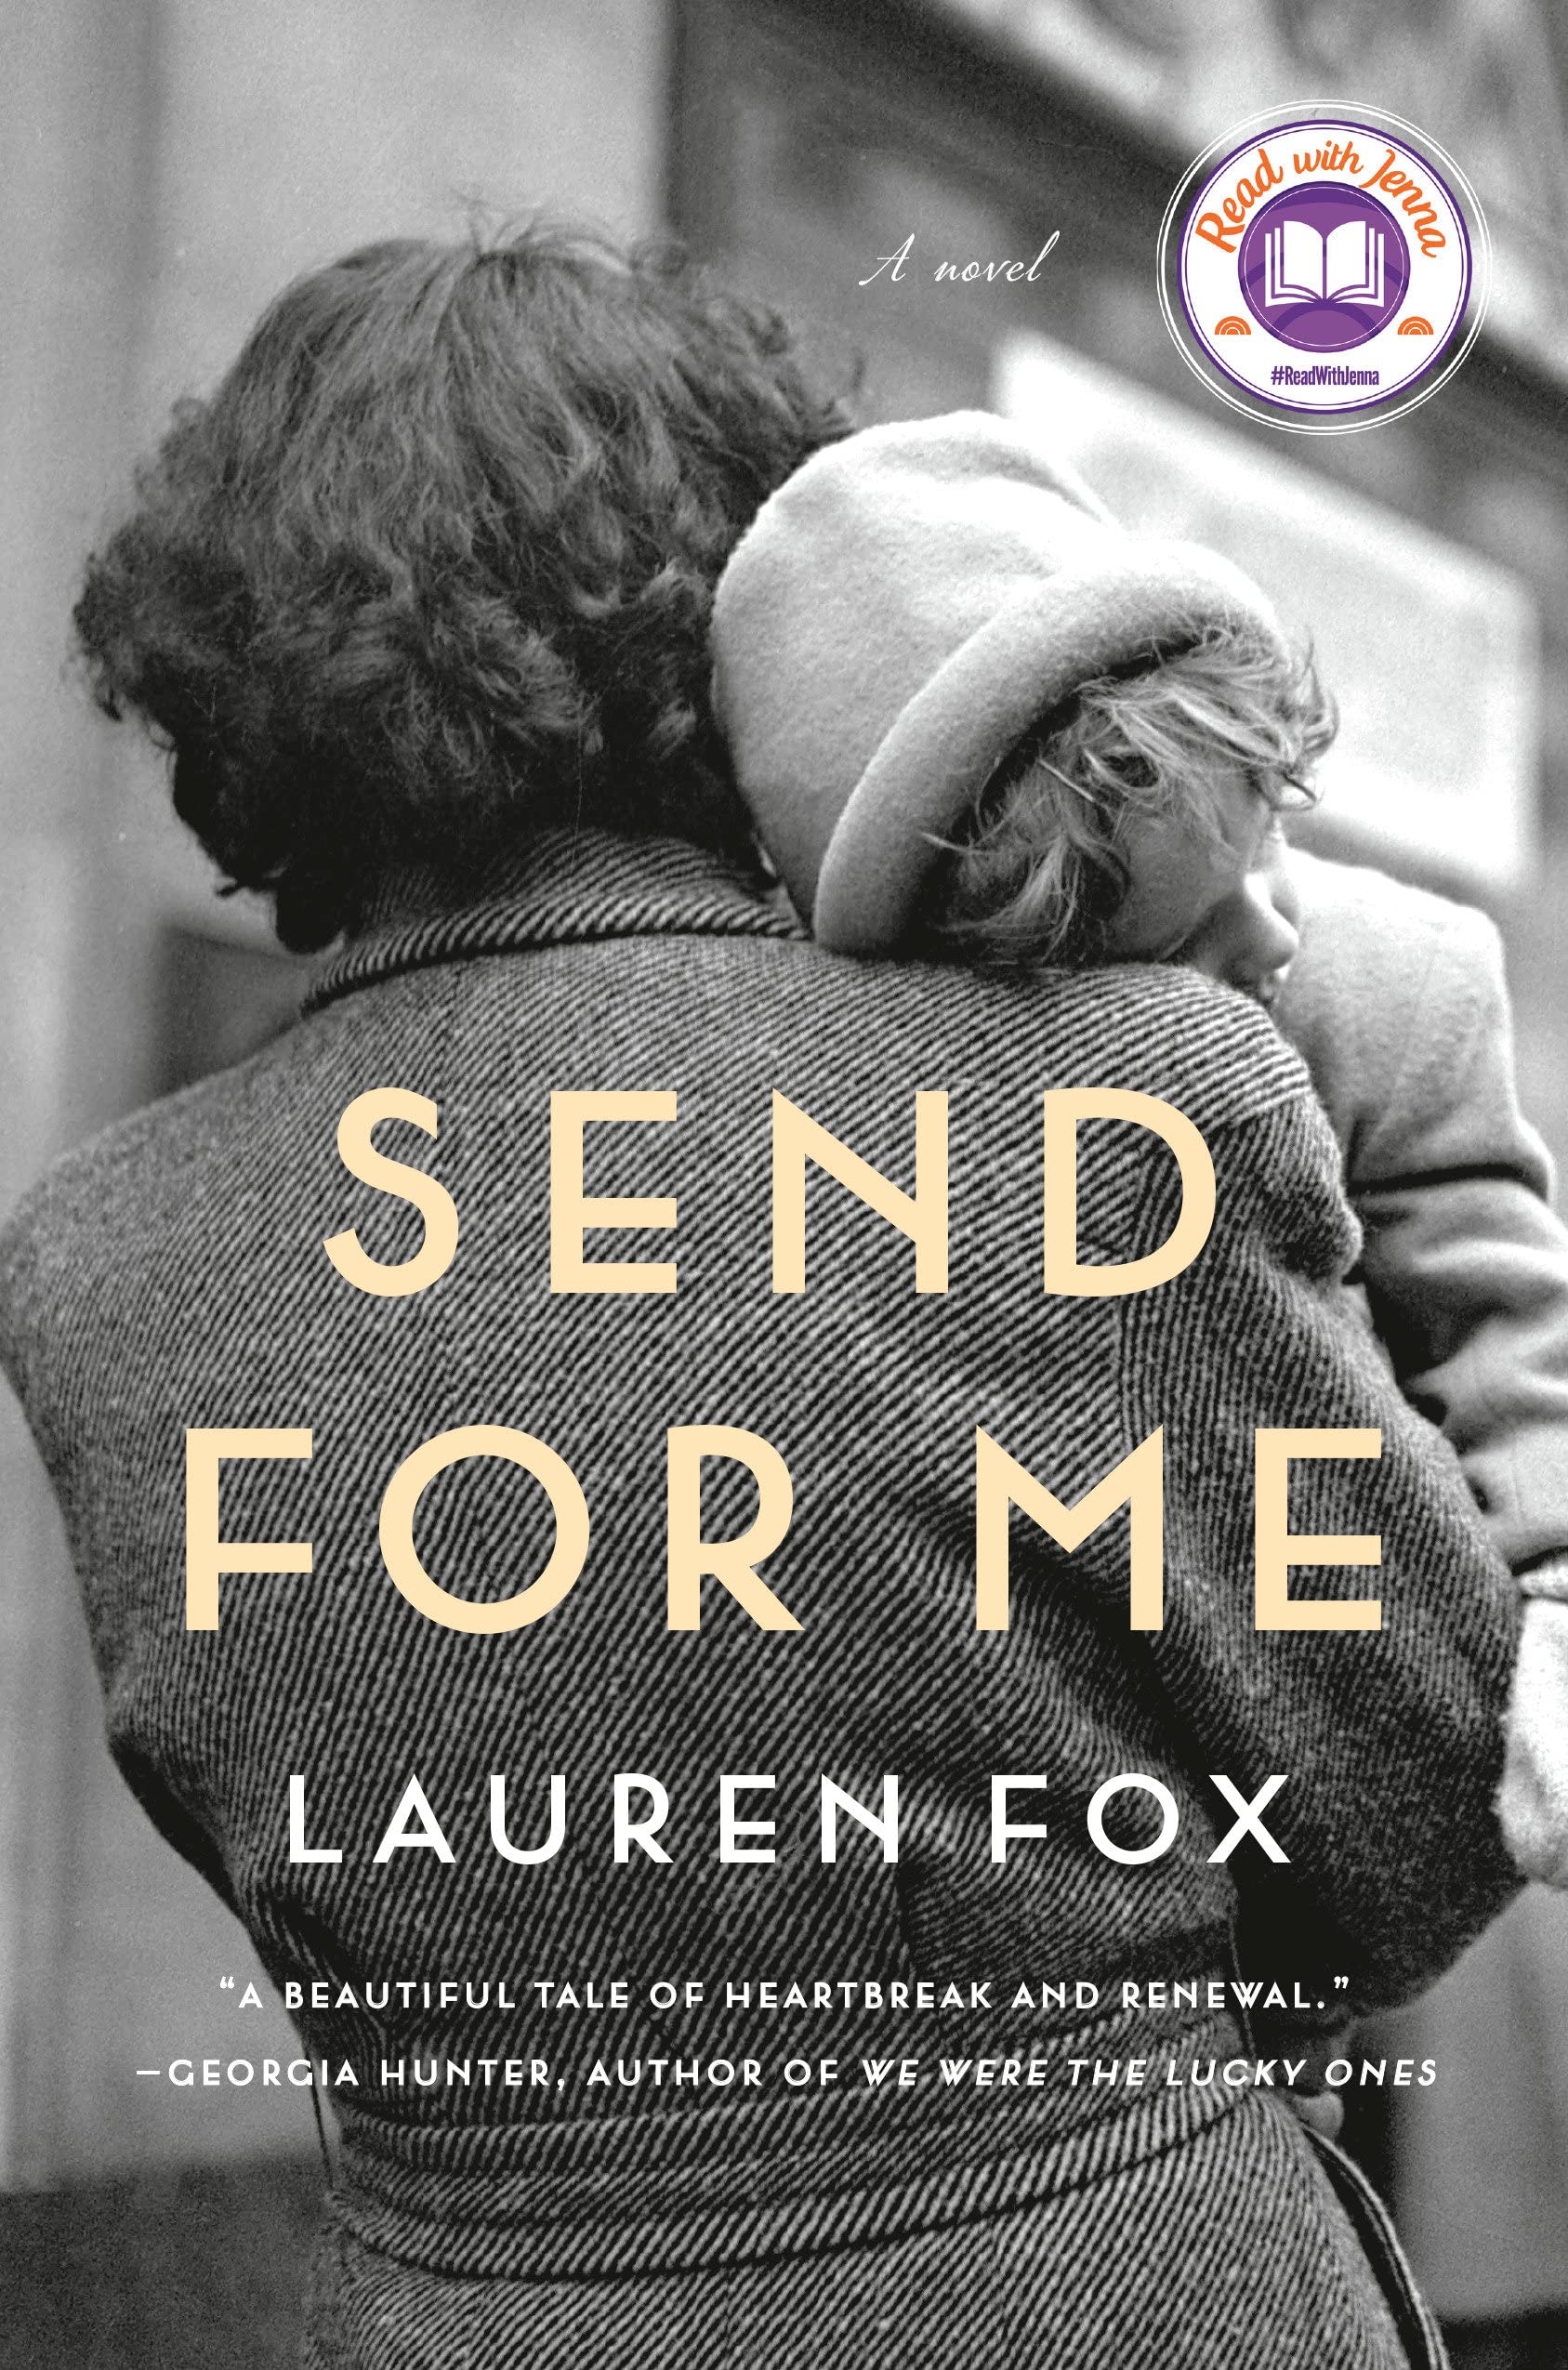 Send for Me book cover